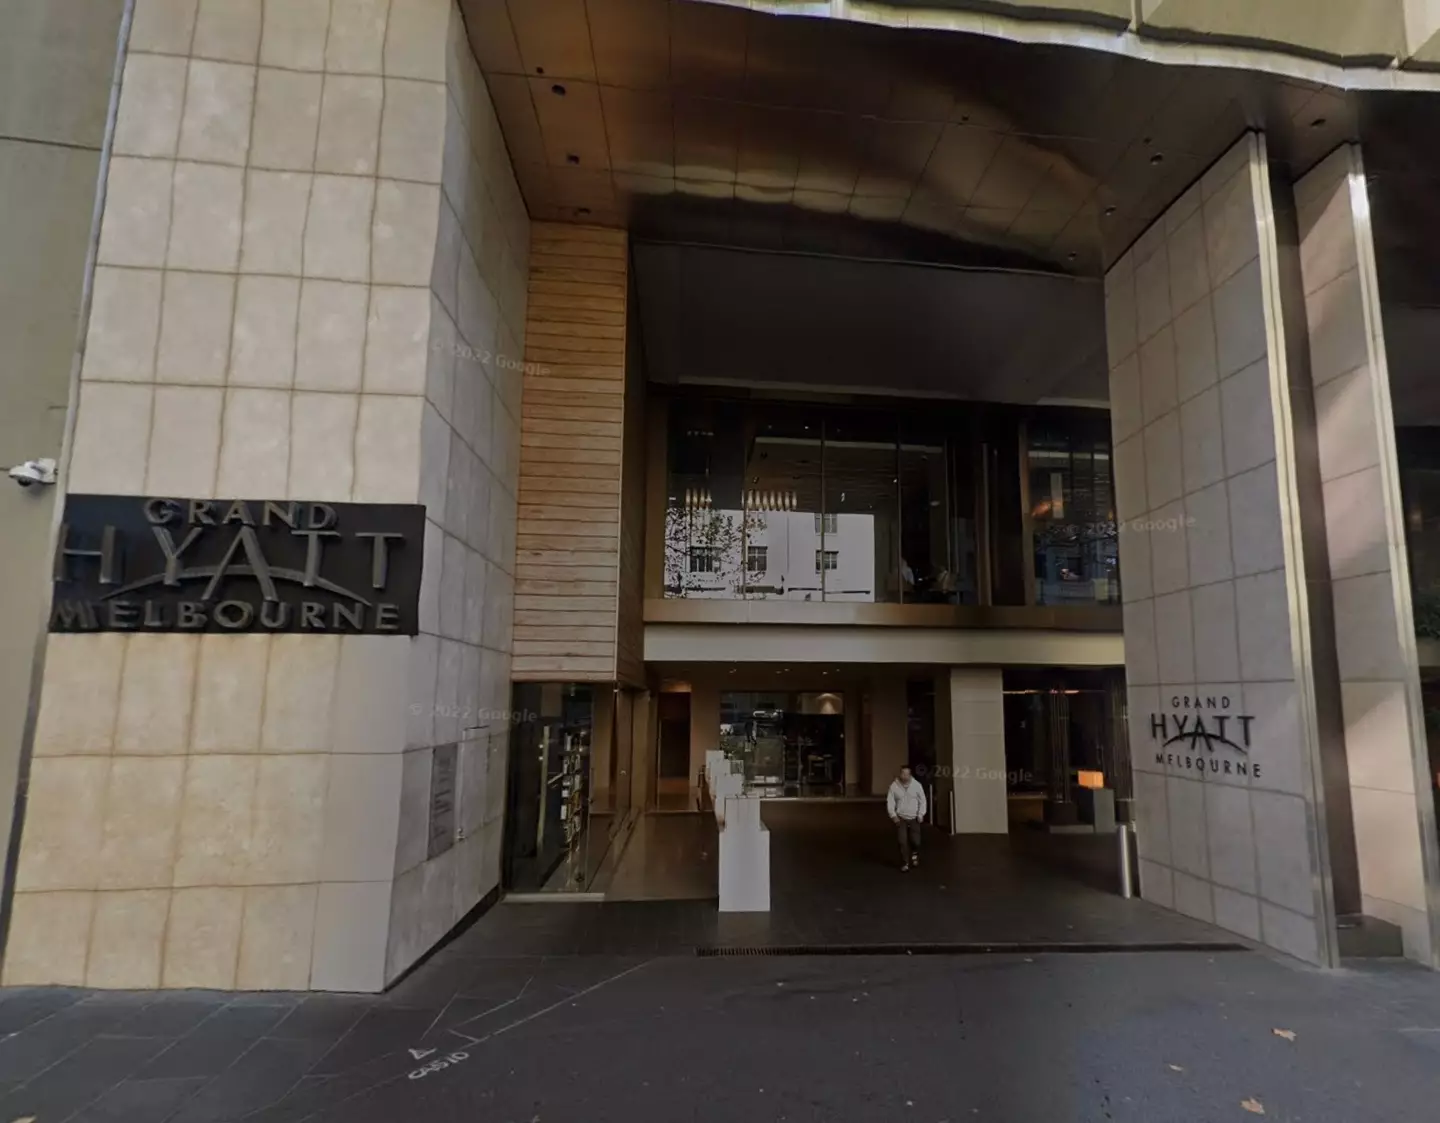 The group stayed at the Grand Hyatt Melbourne.